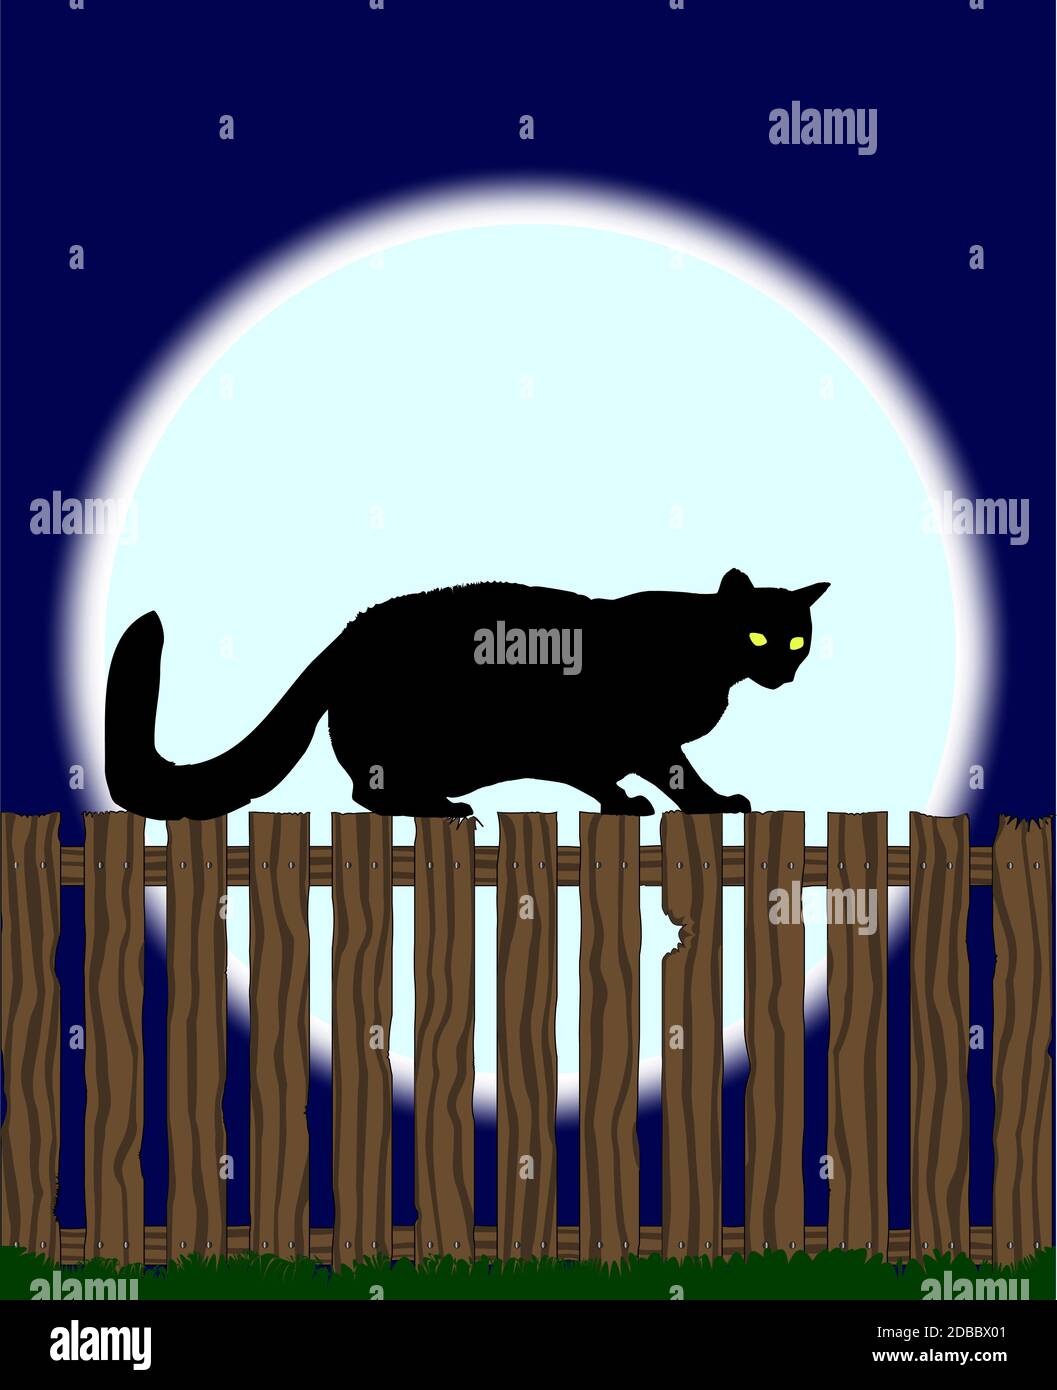 A large full moon with a cat sihouetted on a fence. Stock Photo